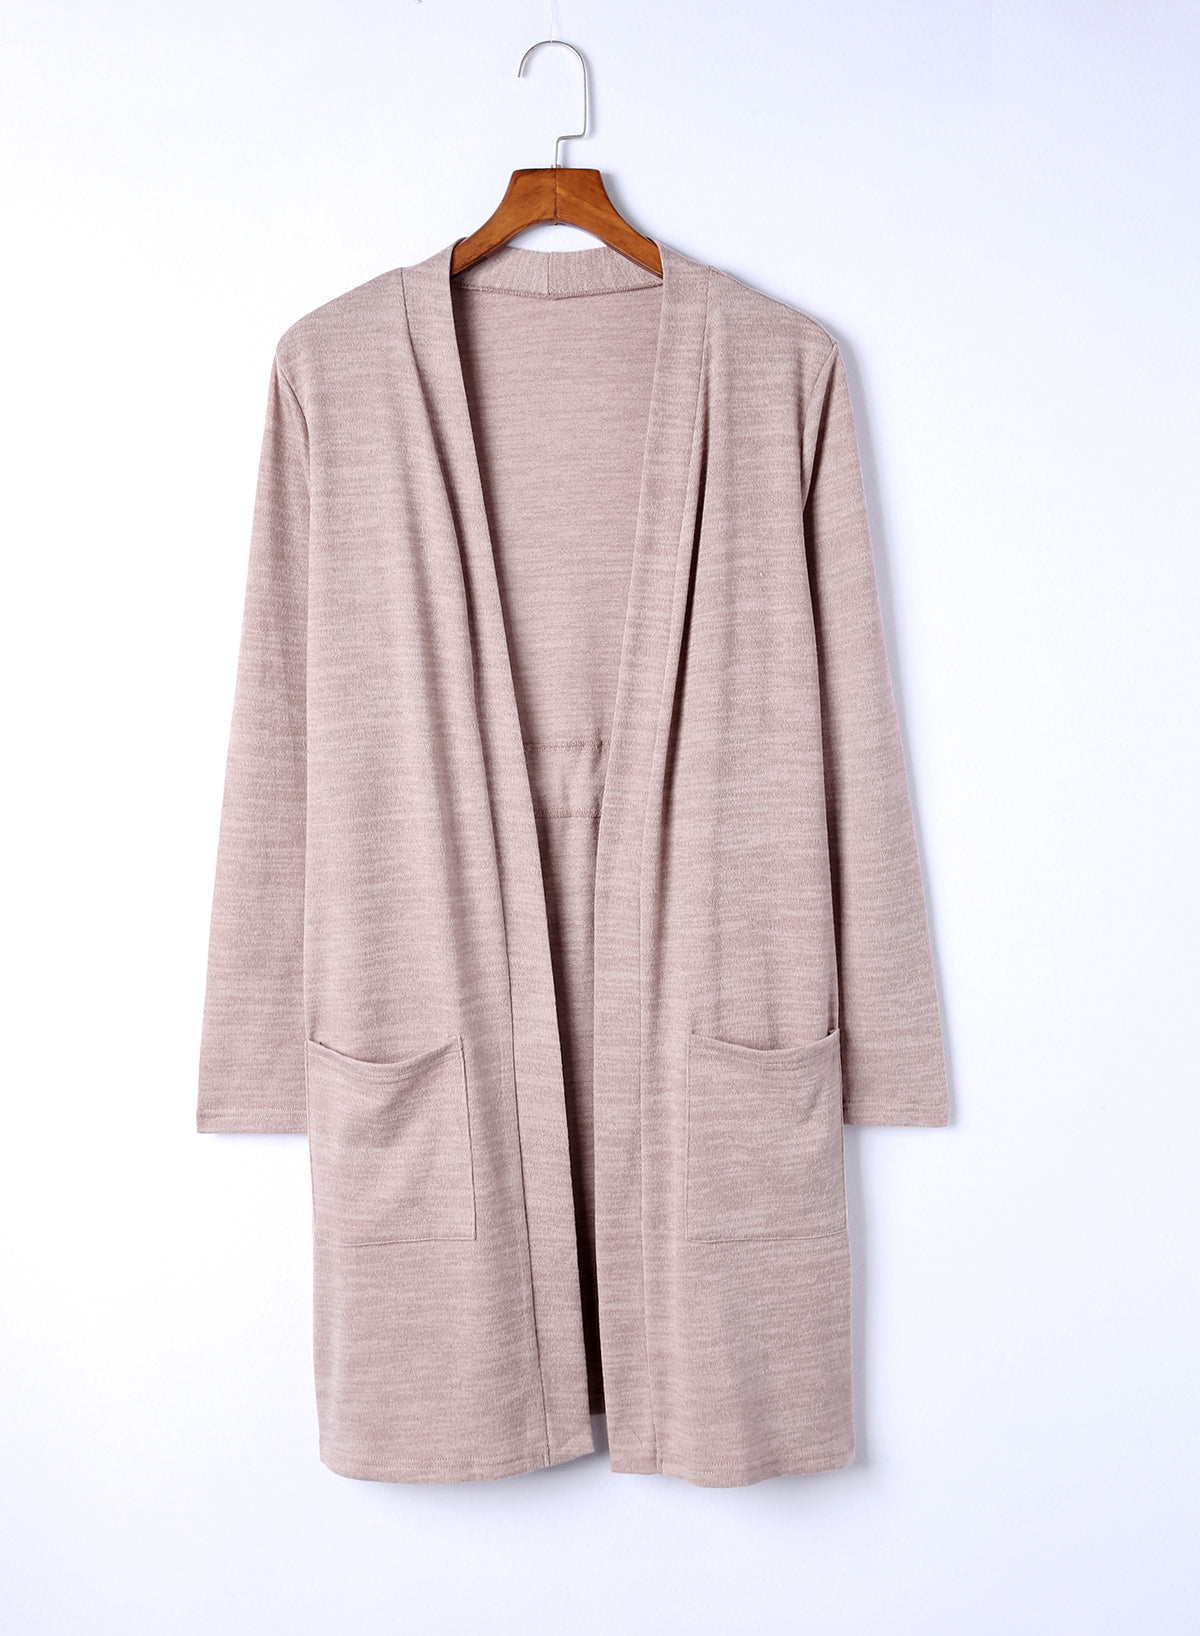 Long Sleeve Open Front Cardigan with Pocket - AllIn Computer